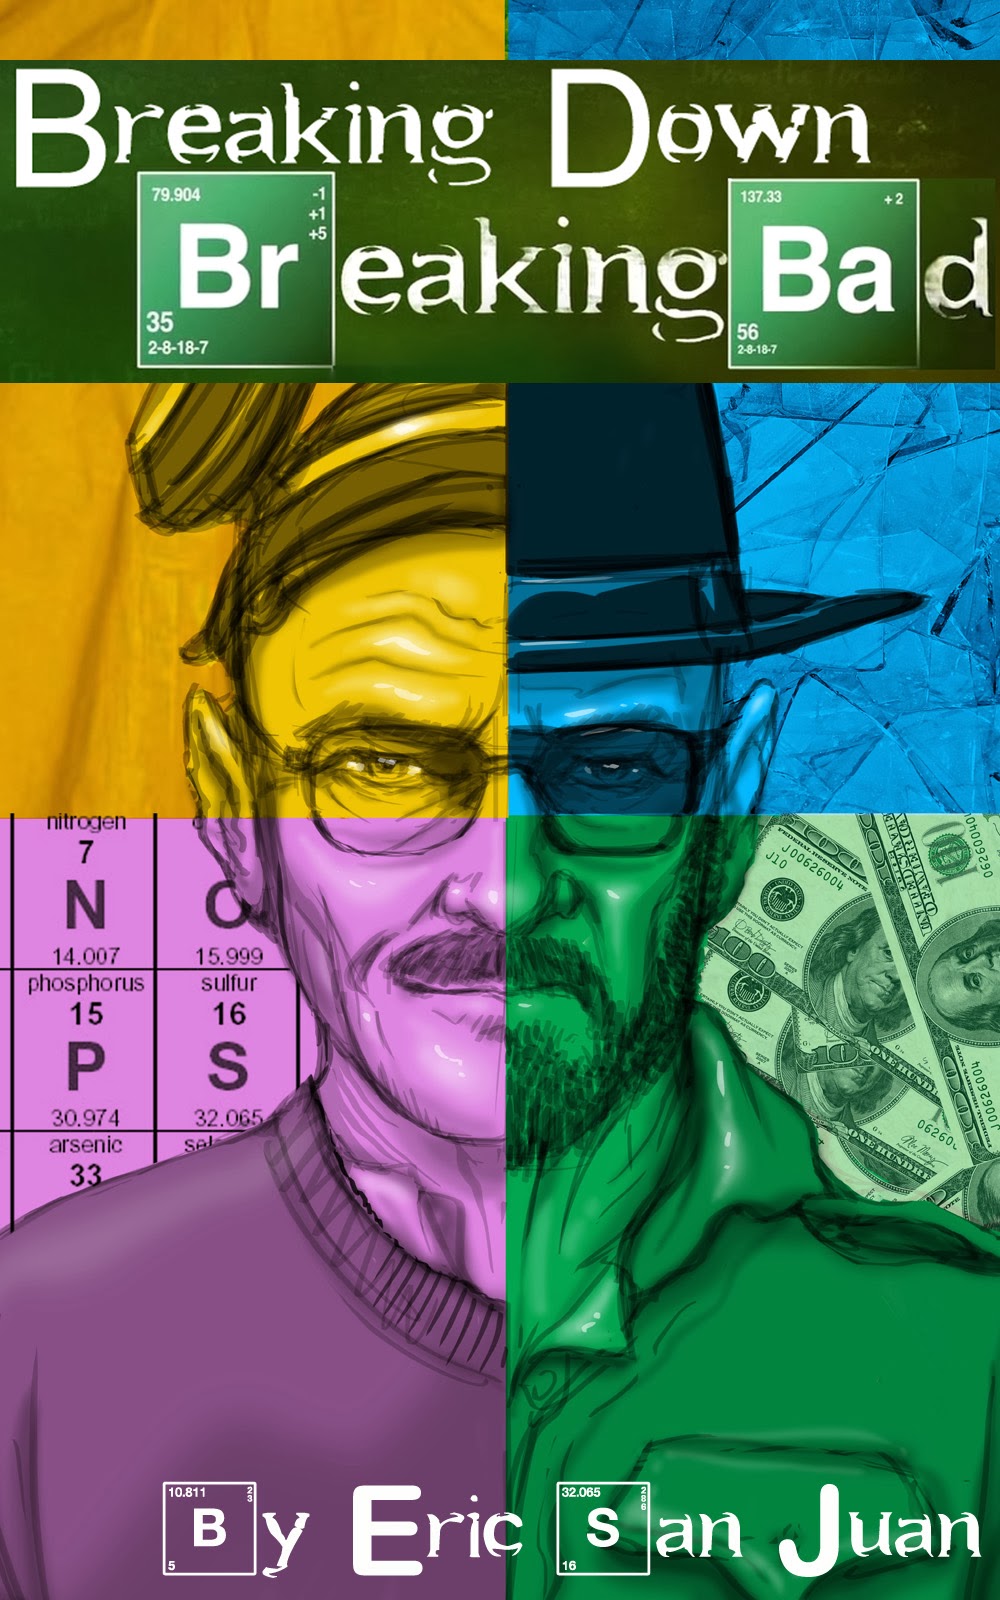 Geek insider, geekinsider, geekinsider. Com,, eric san juan's dissection of breaking bad, entertainment